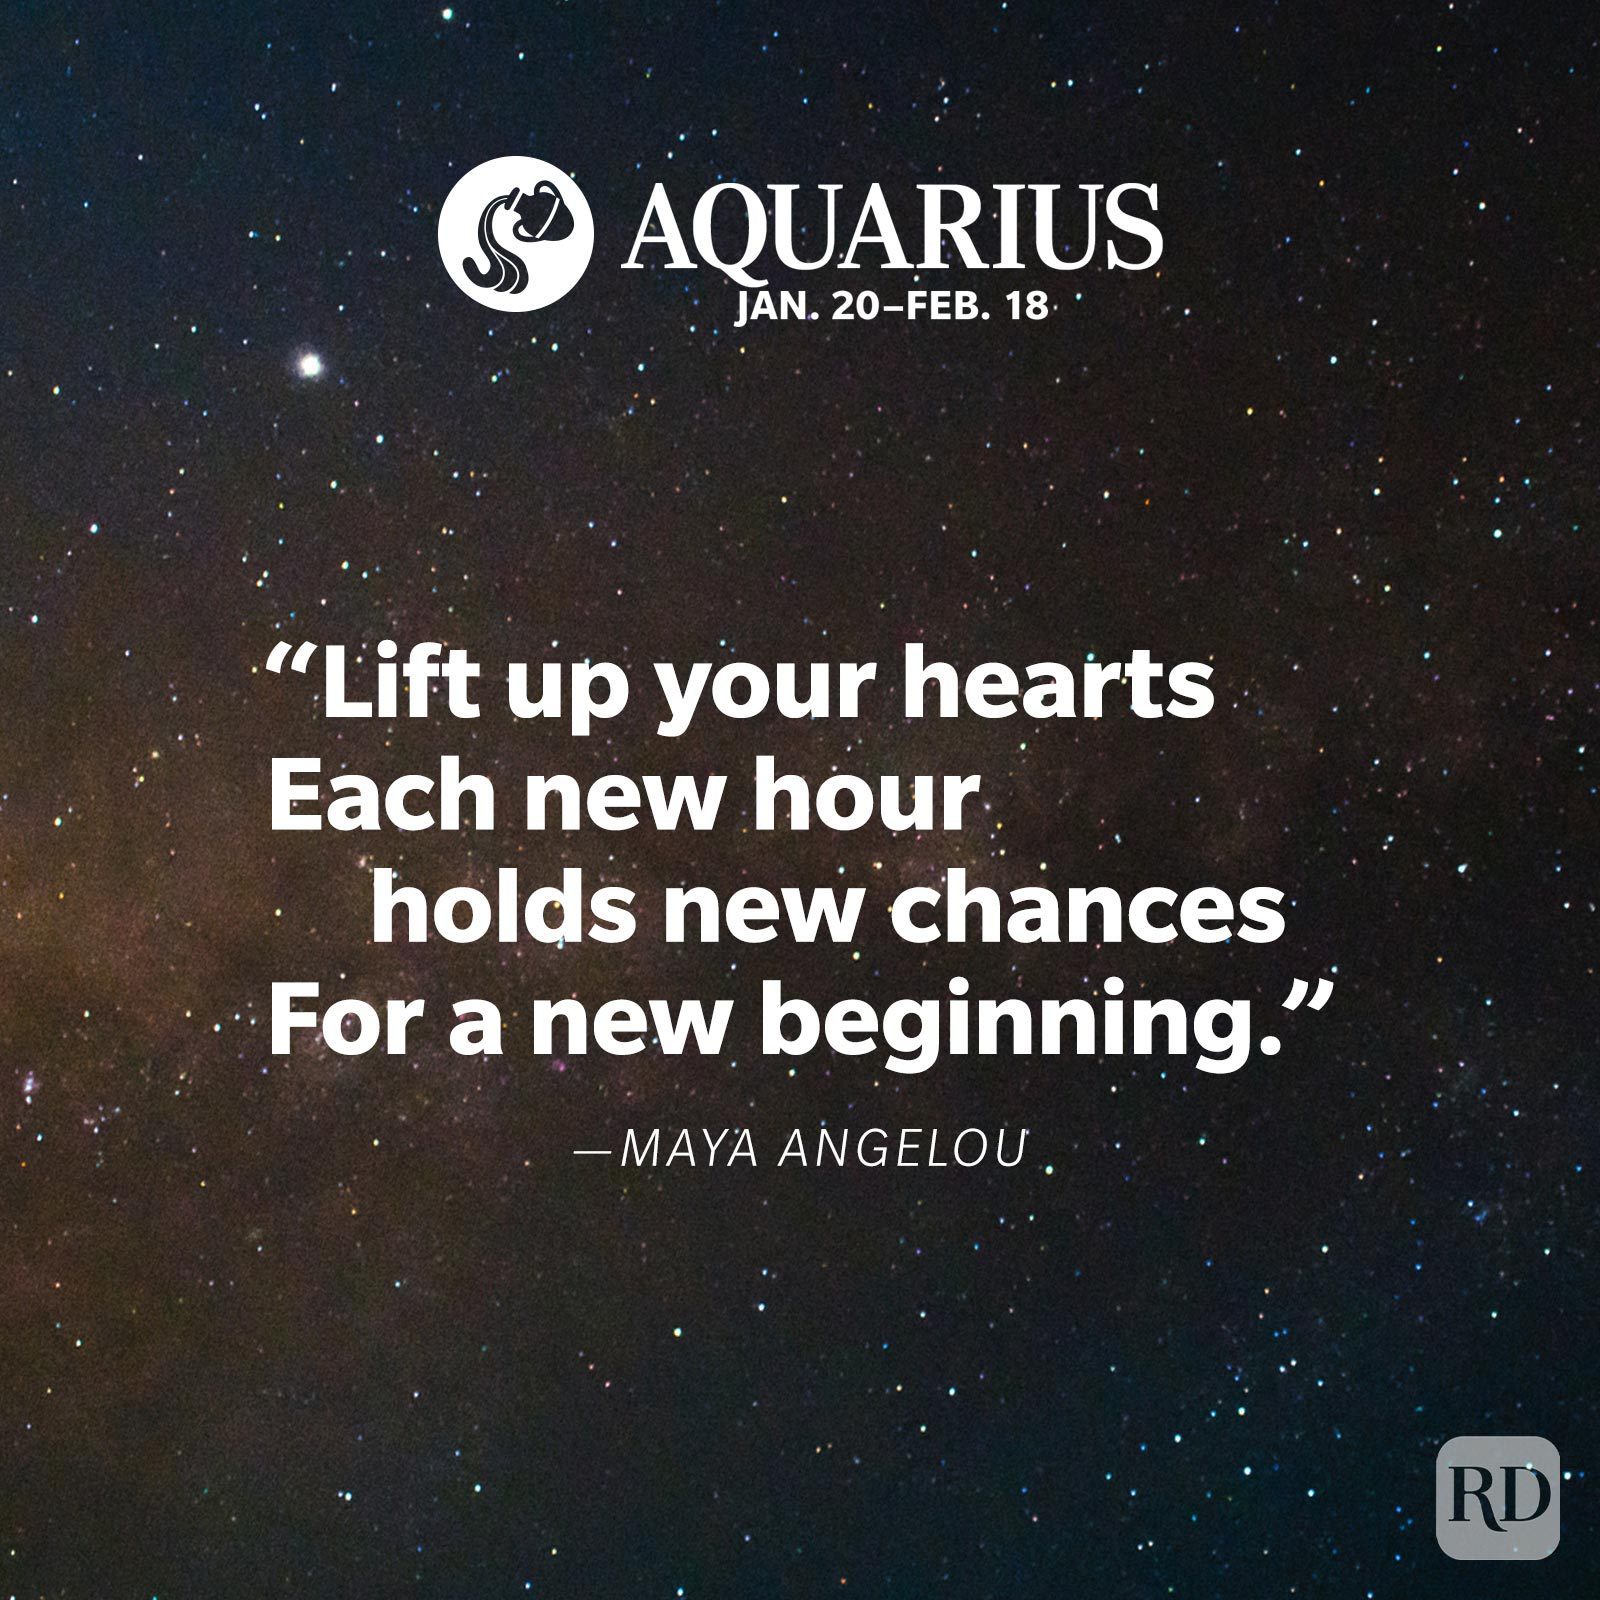 Aquarius The Most Inspirational Zodiac Quotes For Each Sign on Milky Way galaxy background